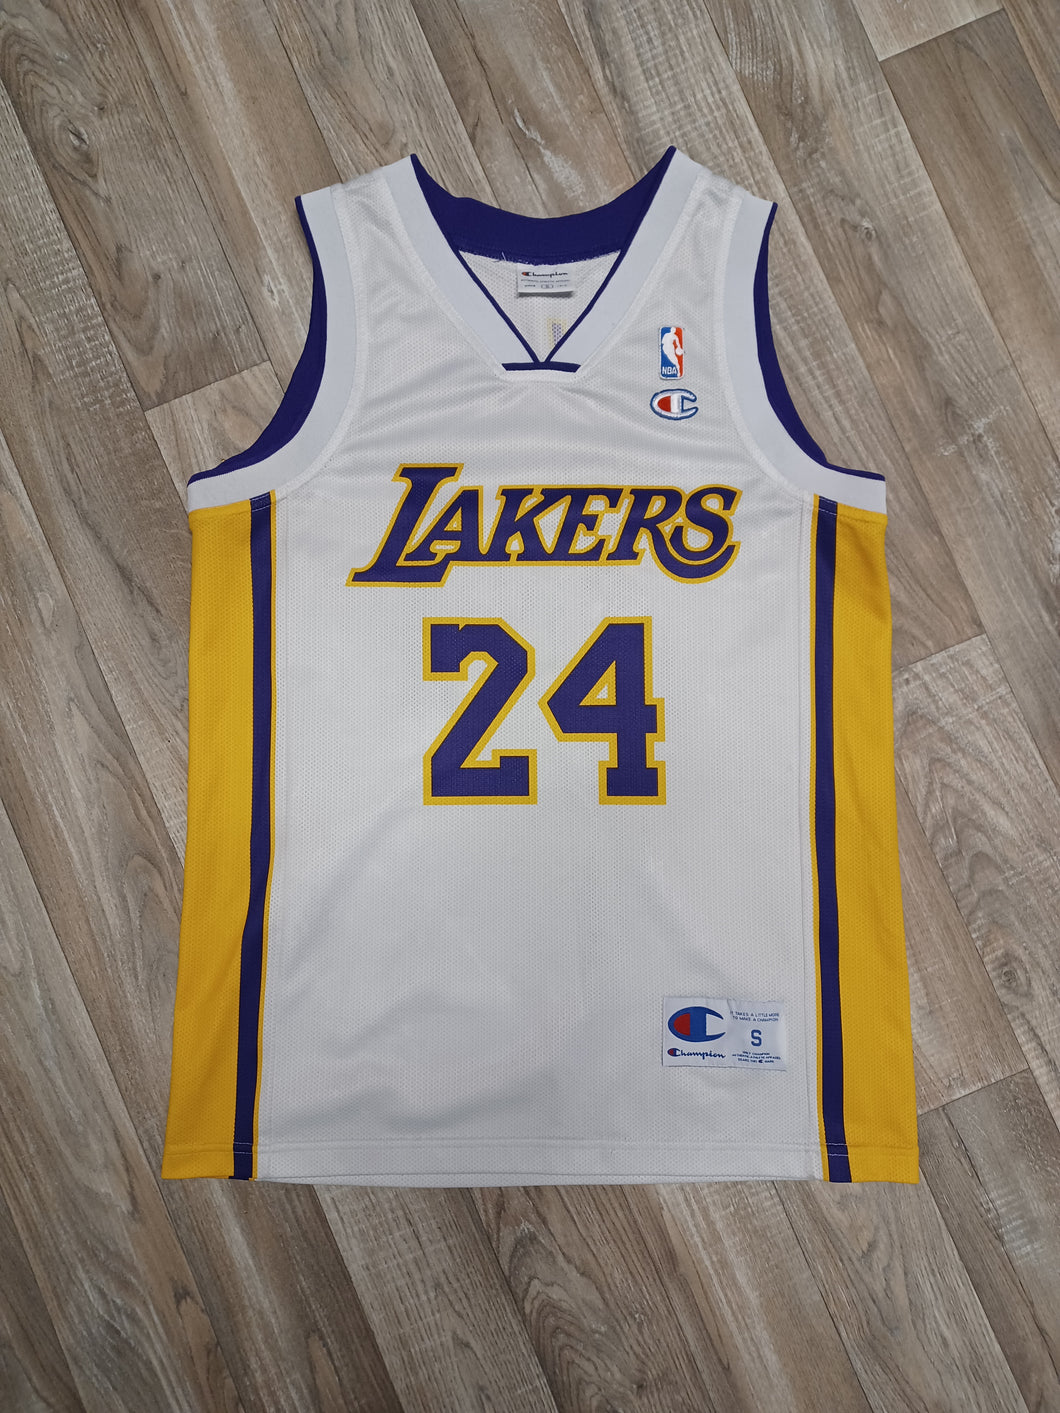 Kobe Bryant Los Angeles Lakers Jersey Size Small